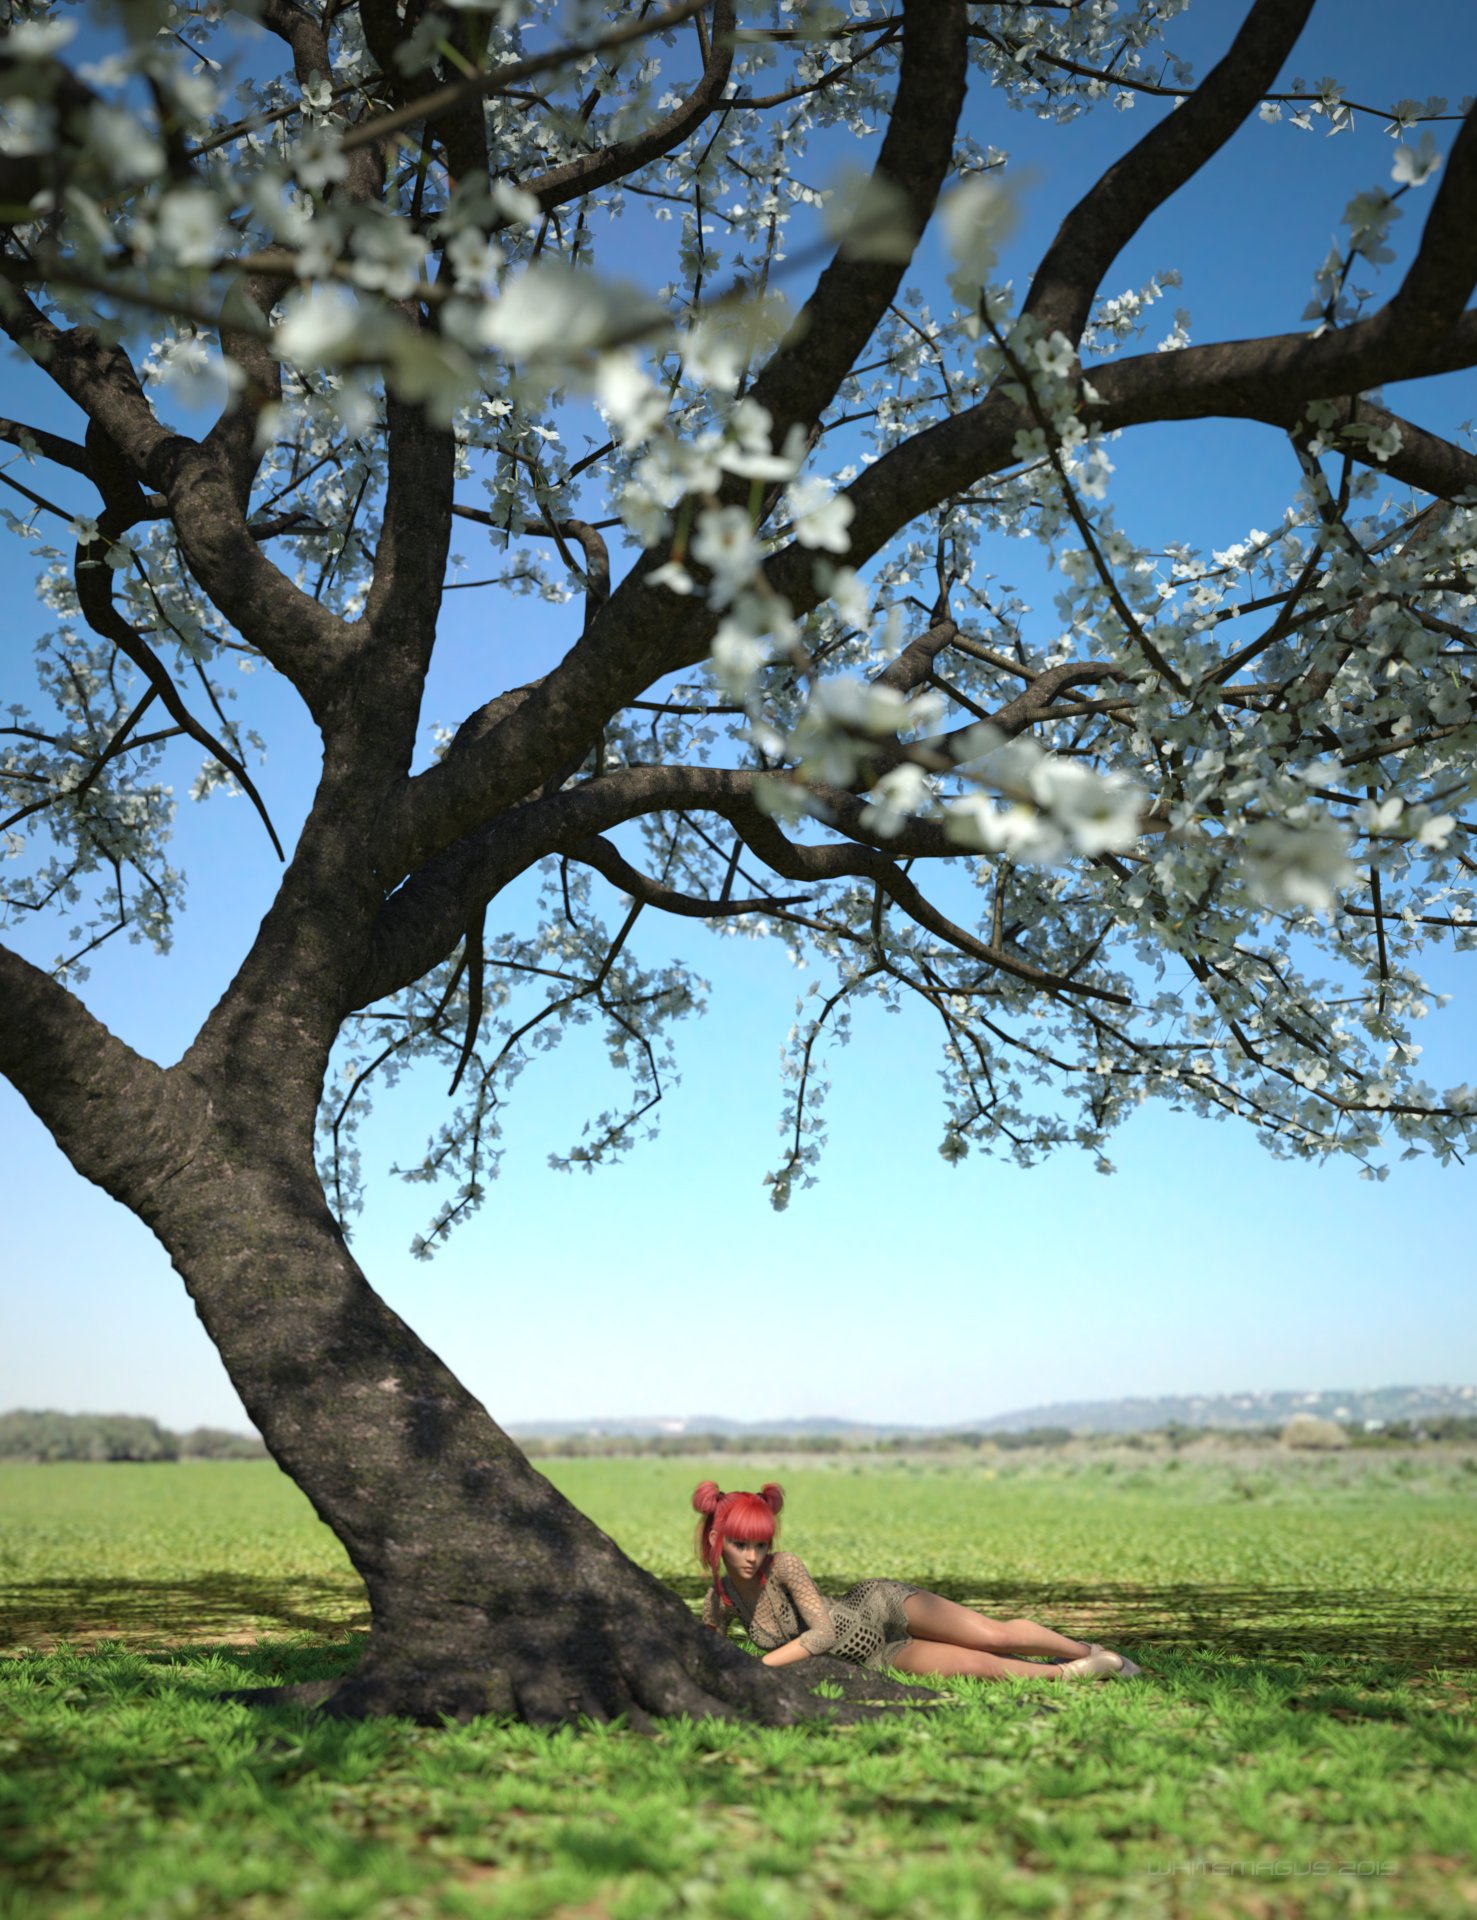 HDRI Green Fields I by: Whitemagus, 3D Models by Daz 3D